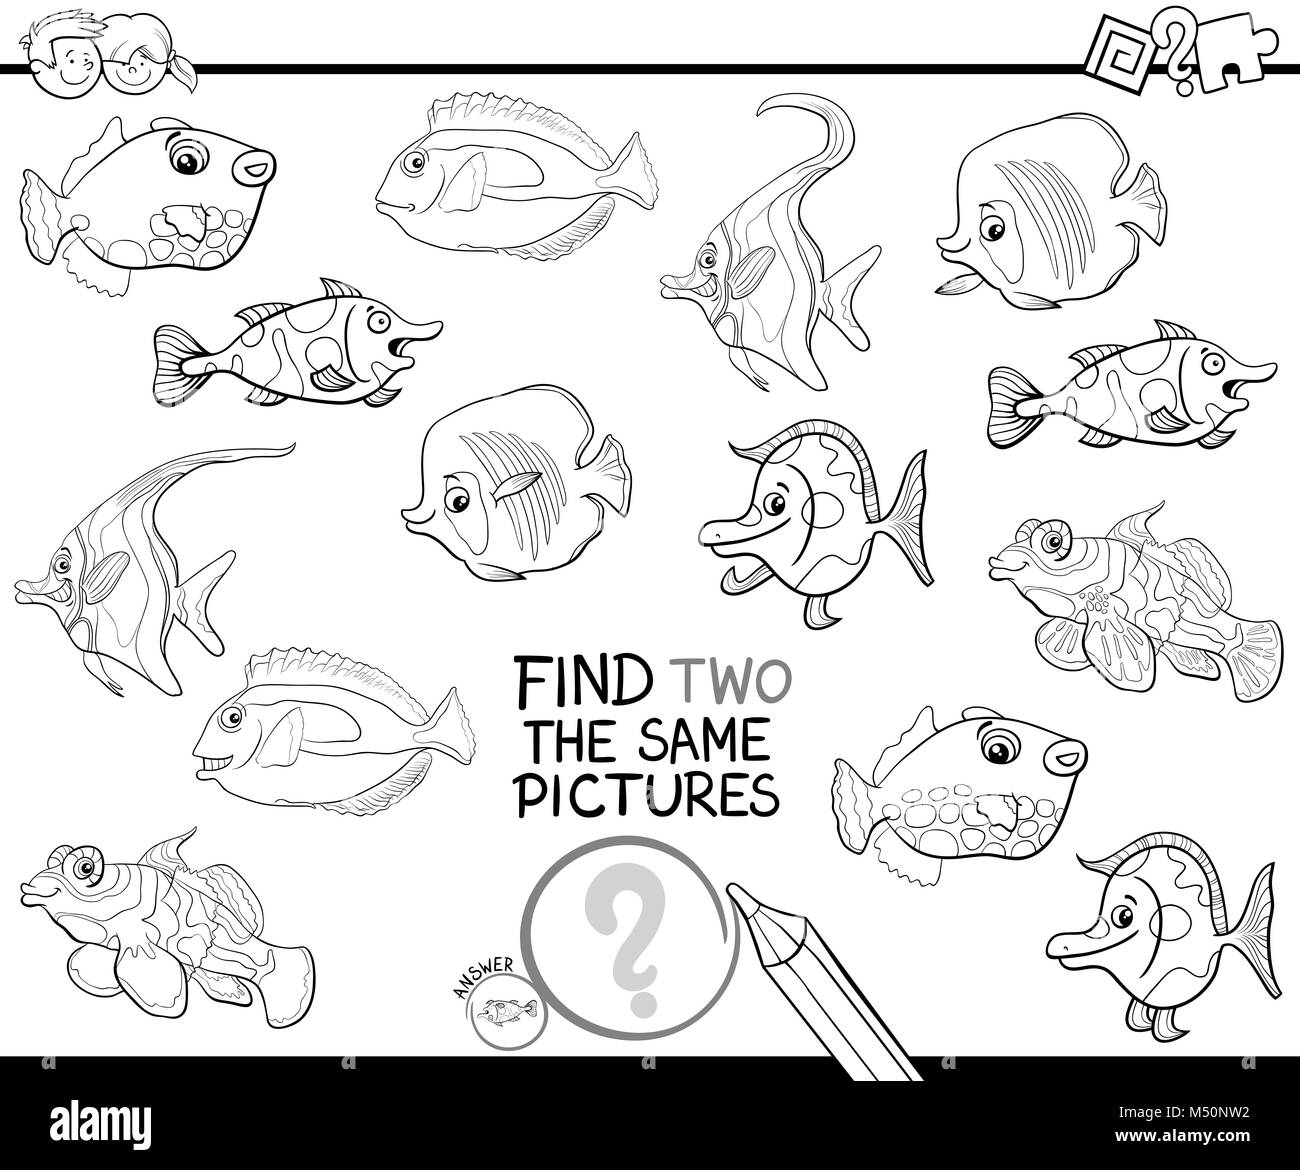 find two identical pictures coloring page Stock Photo